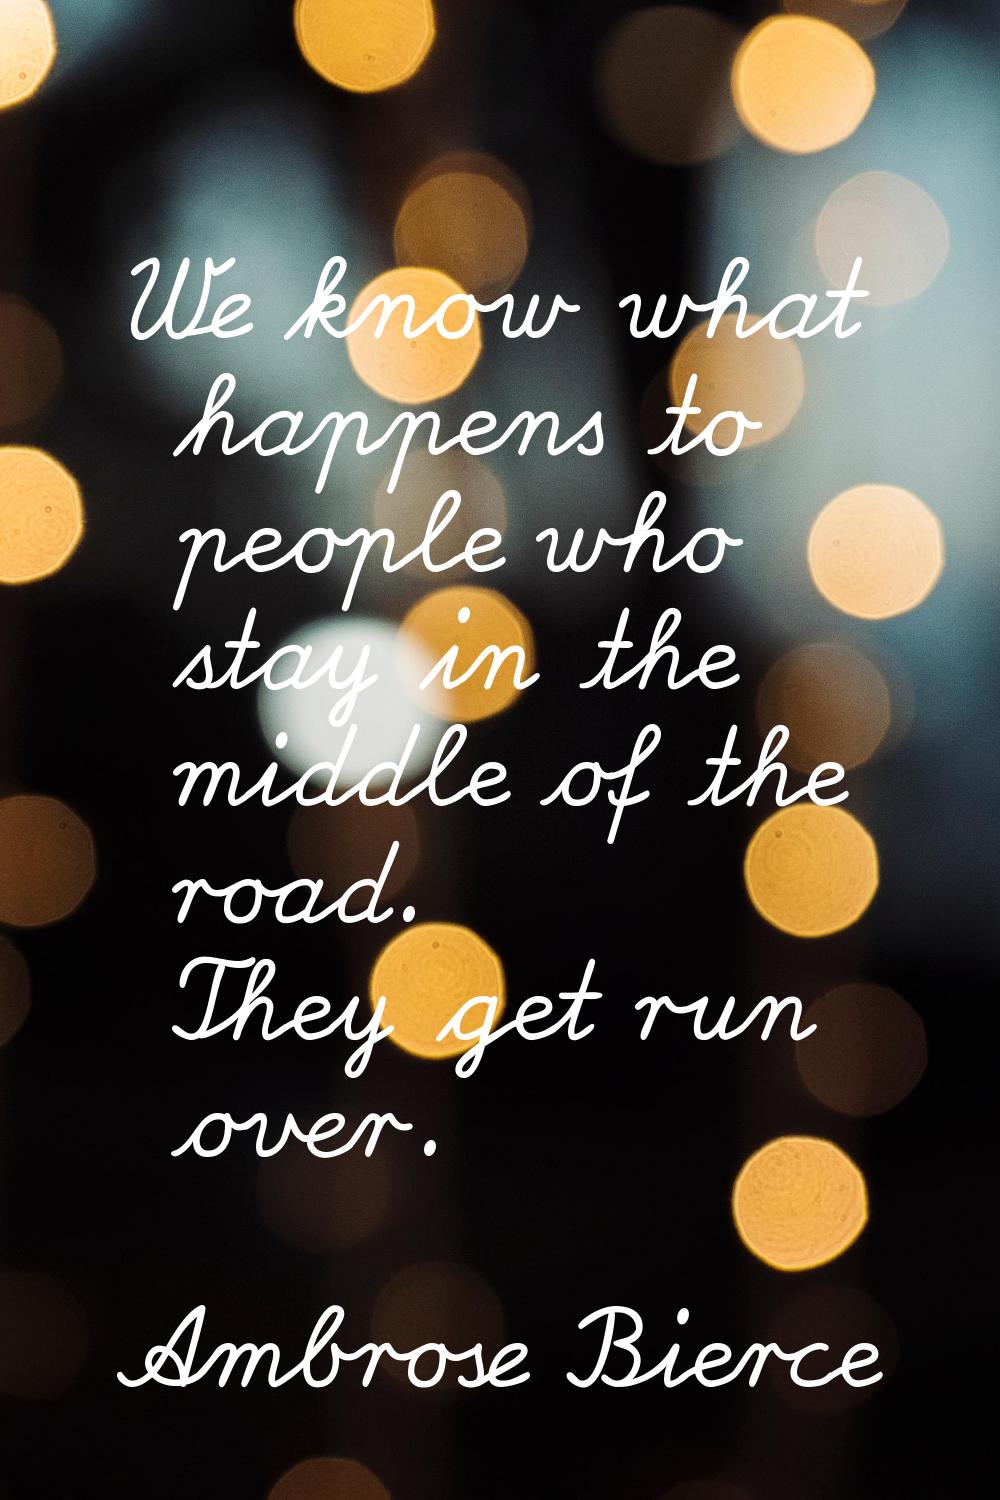 We know what happens to people who stay in the middle of the road. They get run over.